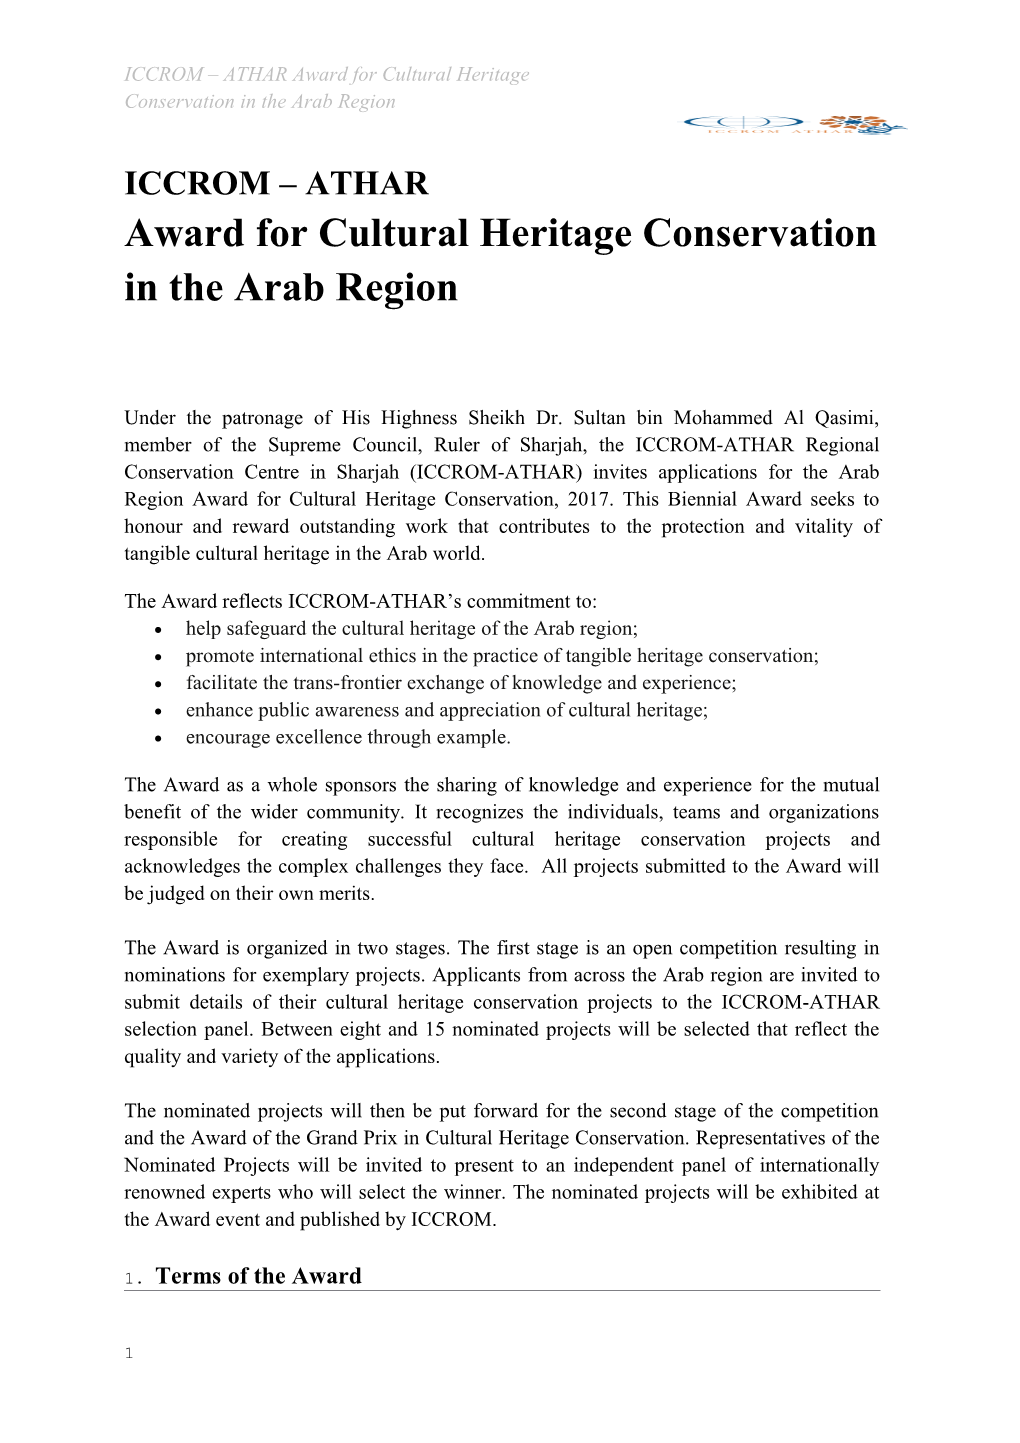 ICCROM ATHAR Award for Cultural Heritage